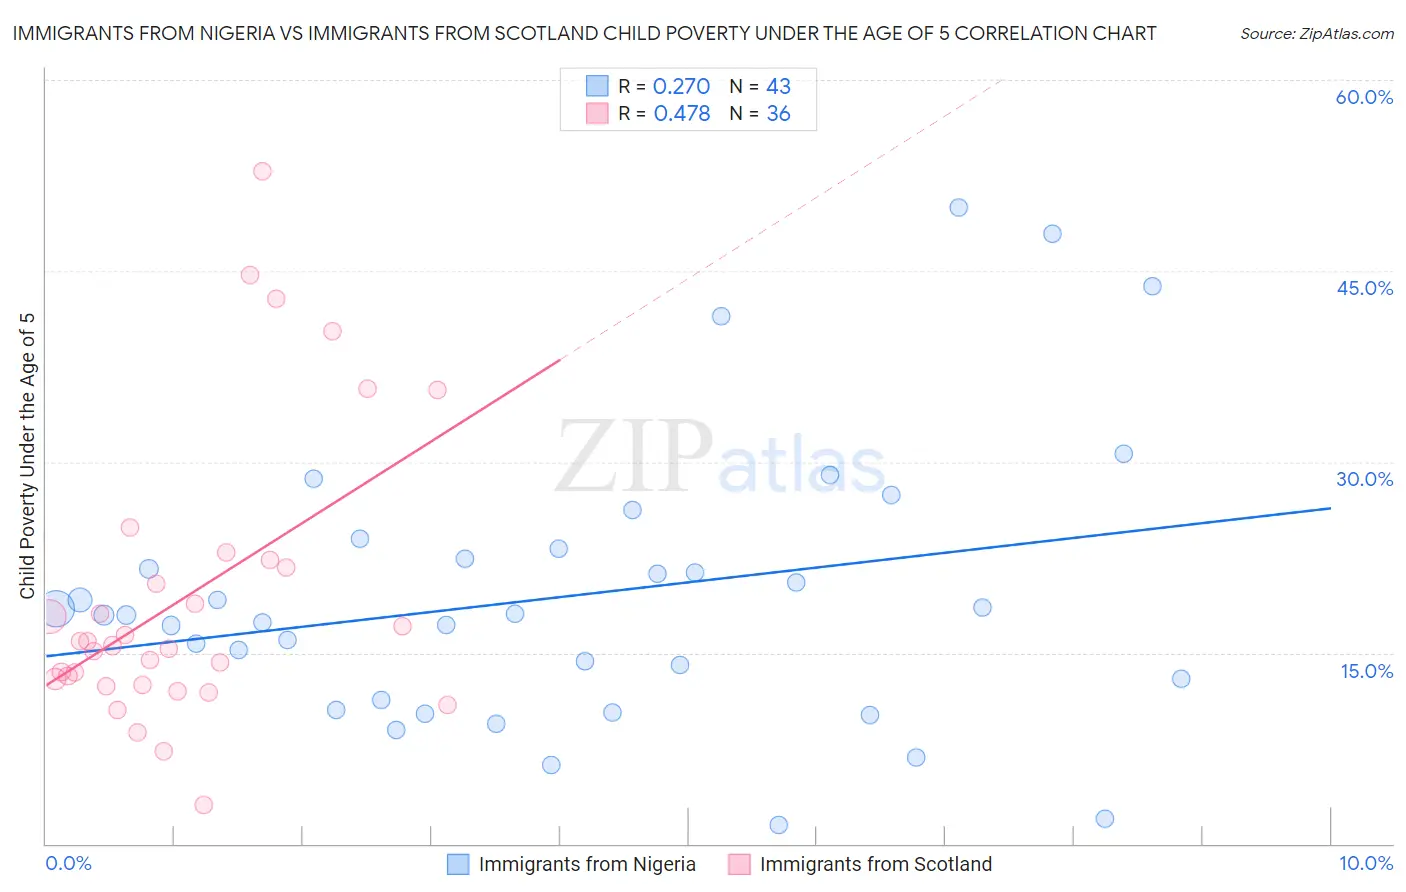 Immigrants from Nigeria vs Immigrants from Scotland Child Poverty Under the Age of 5